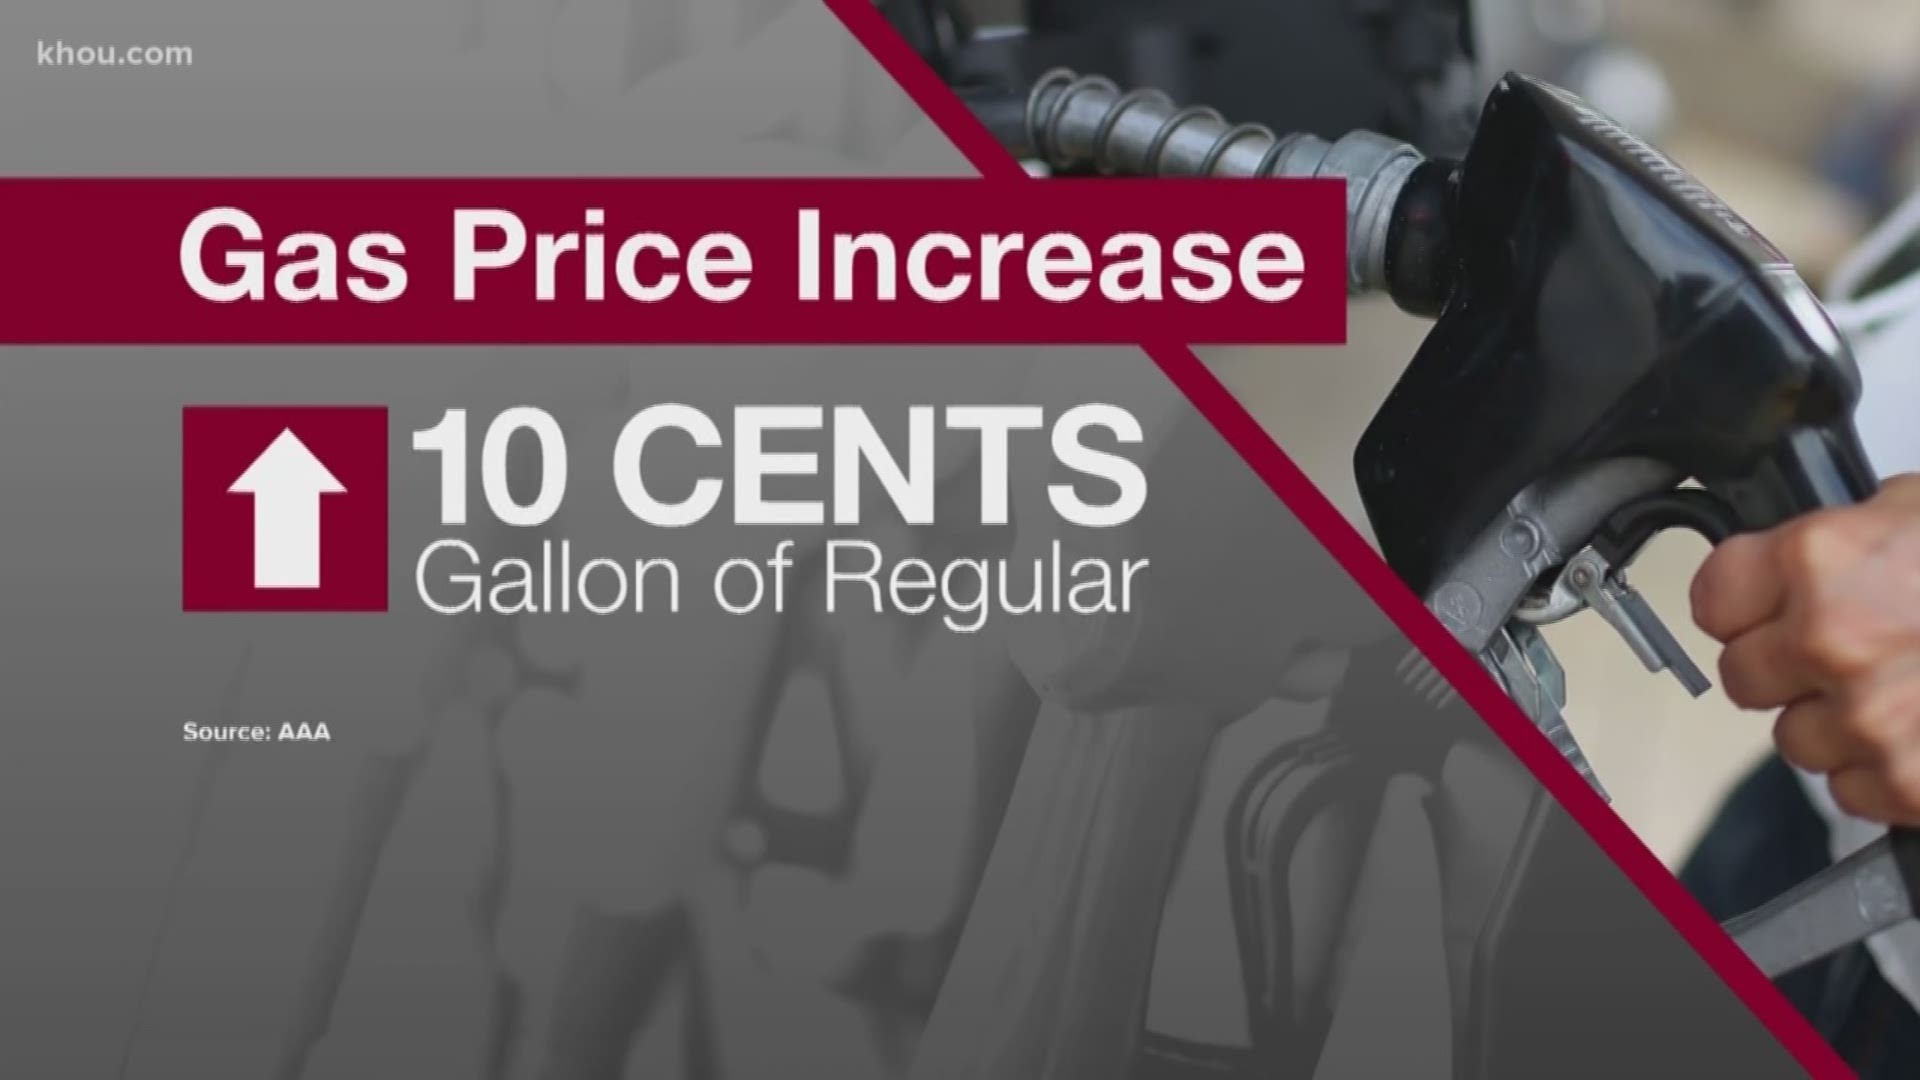 We've all been dealing with rising prices at the gas pump. AAA reports that gas prices in Texas have jumped 29 cents in the last month and they expect that amount to climb even higher.